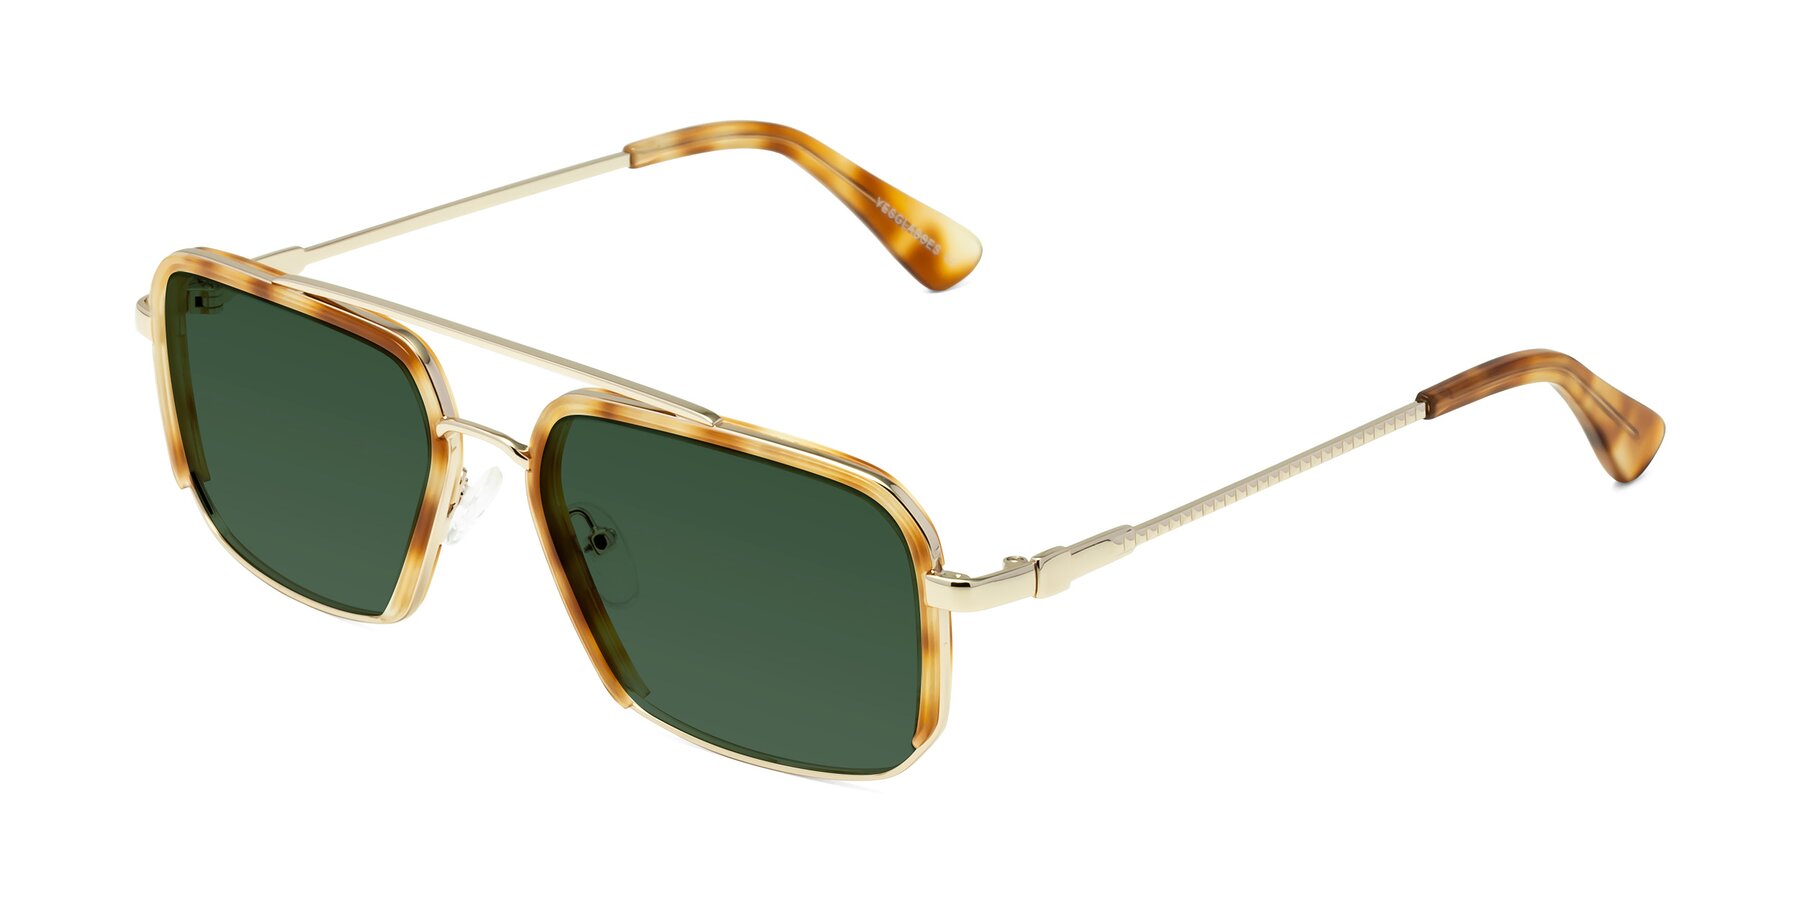 Angle of Dechter in Yellow Tortoise-Gold with Green Tinted Lenses